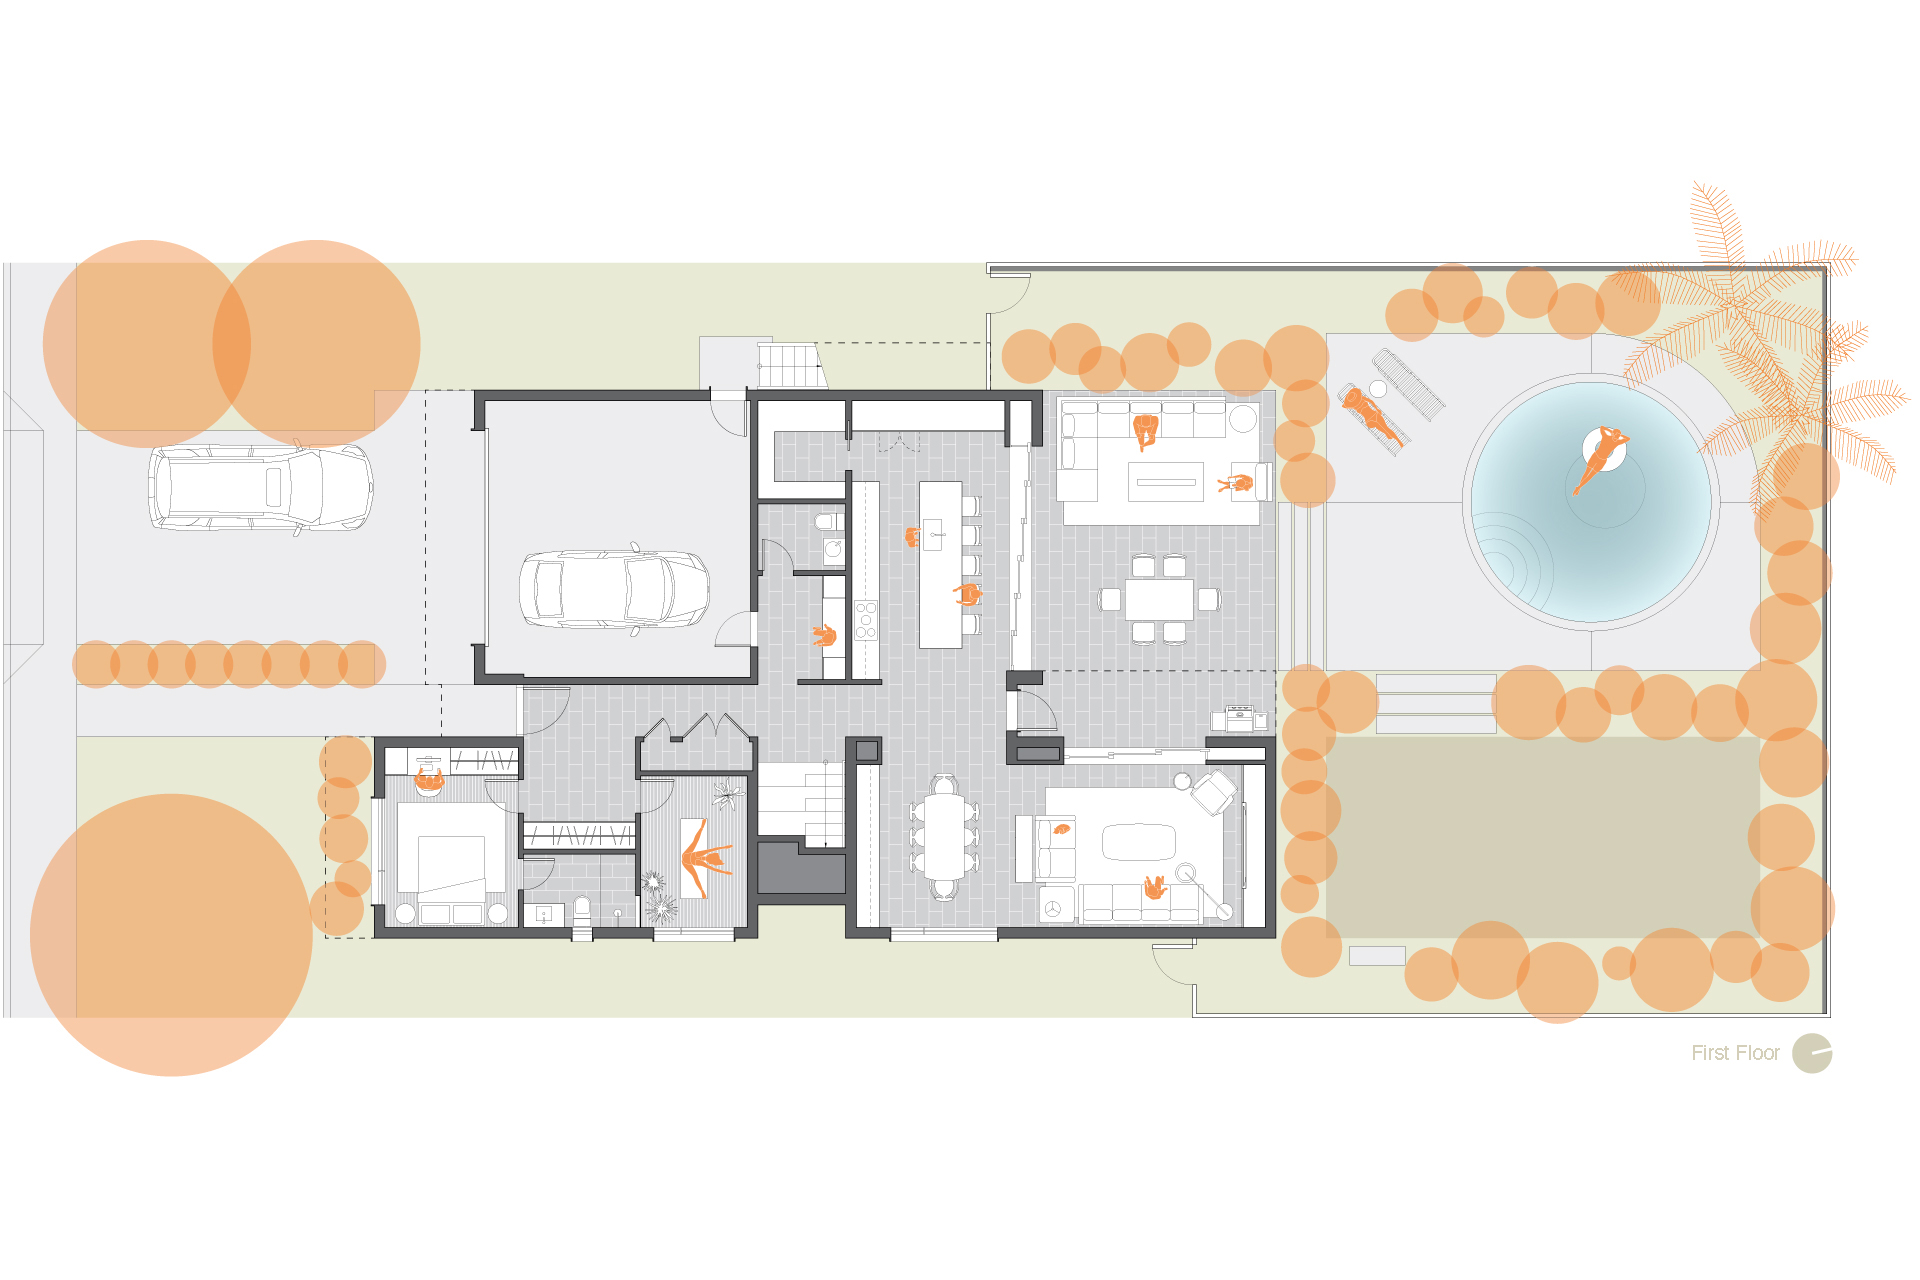 First floor plan of the new modern home.